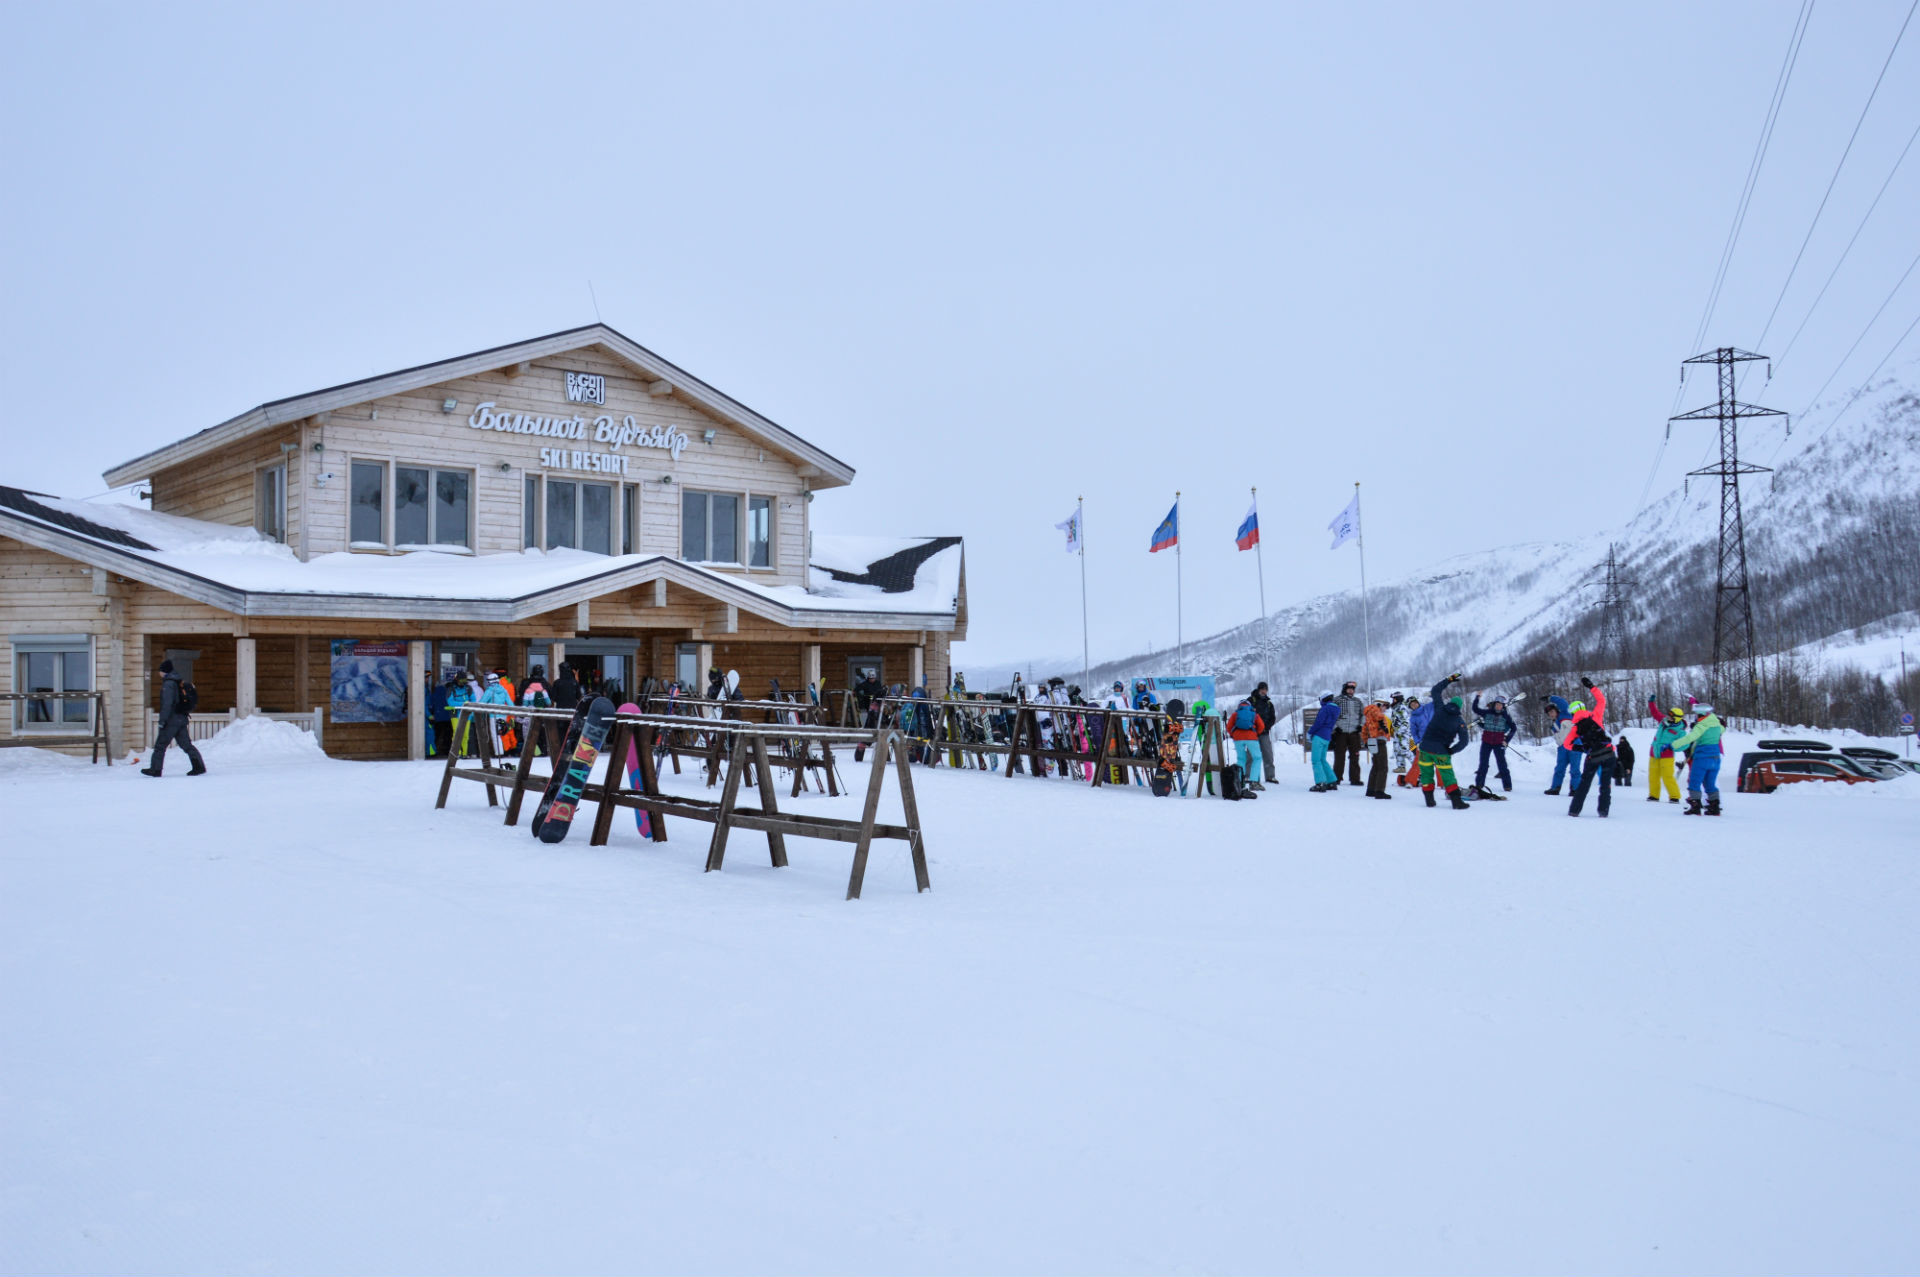 Skiers and snowboarders flock to this brand new resort